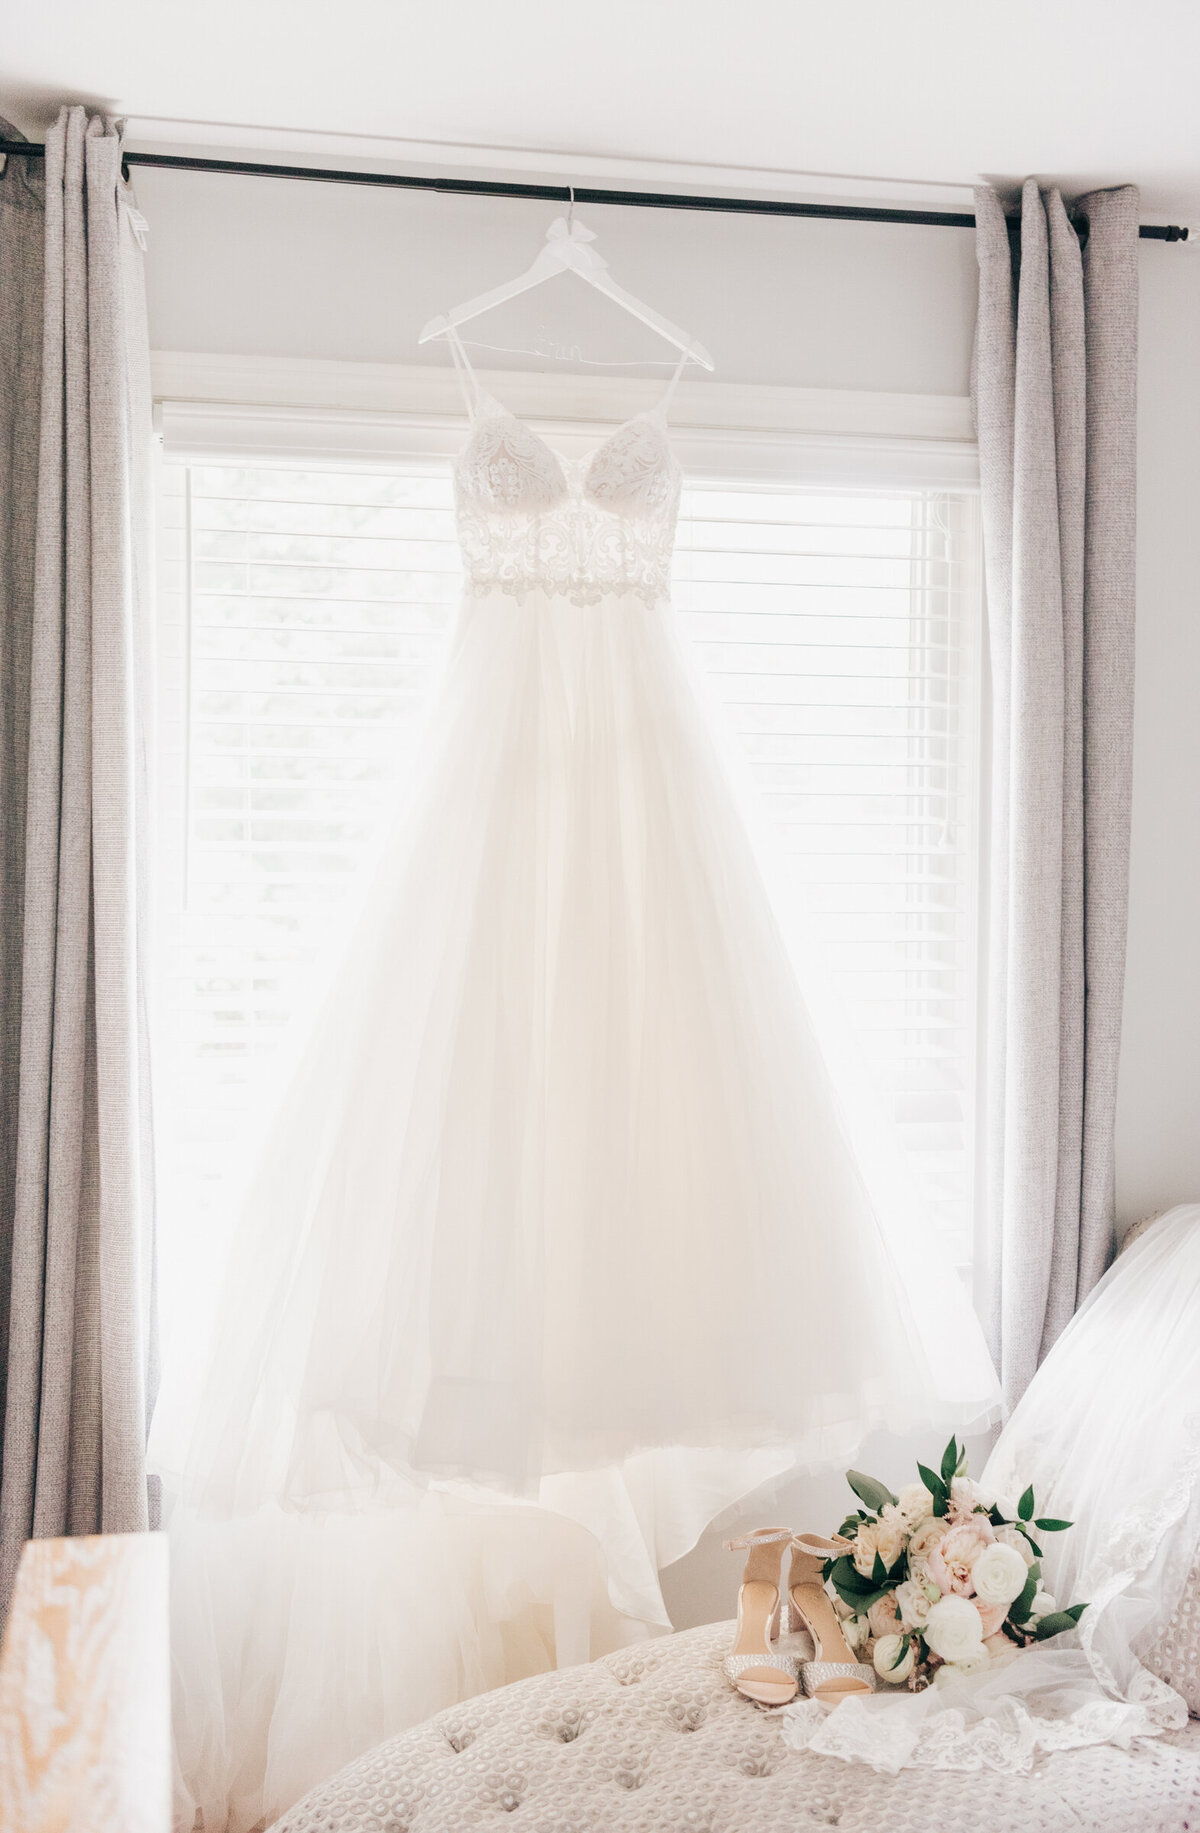 Beautiful white wedding dress hung in window beside white wedding heels and bouquet while getting ready for outdoor wedding